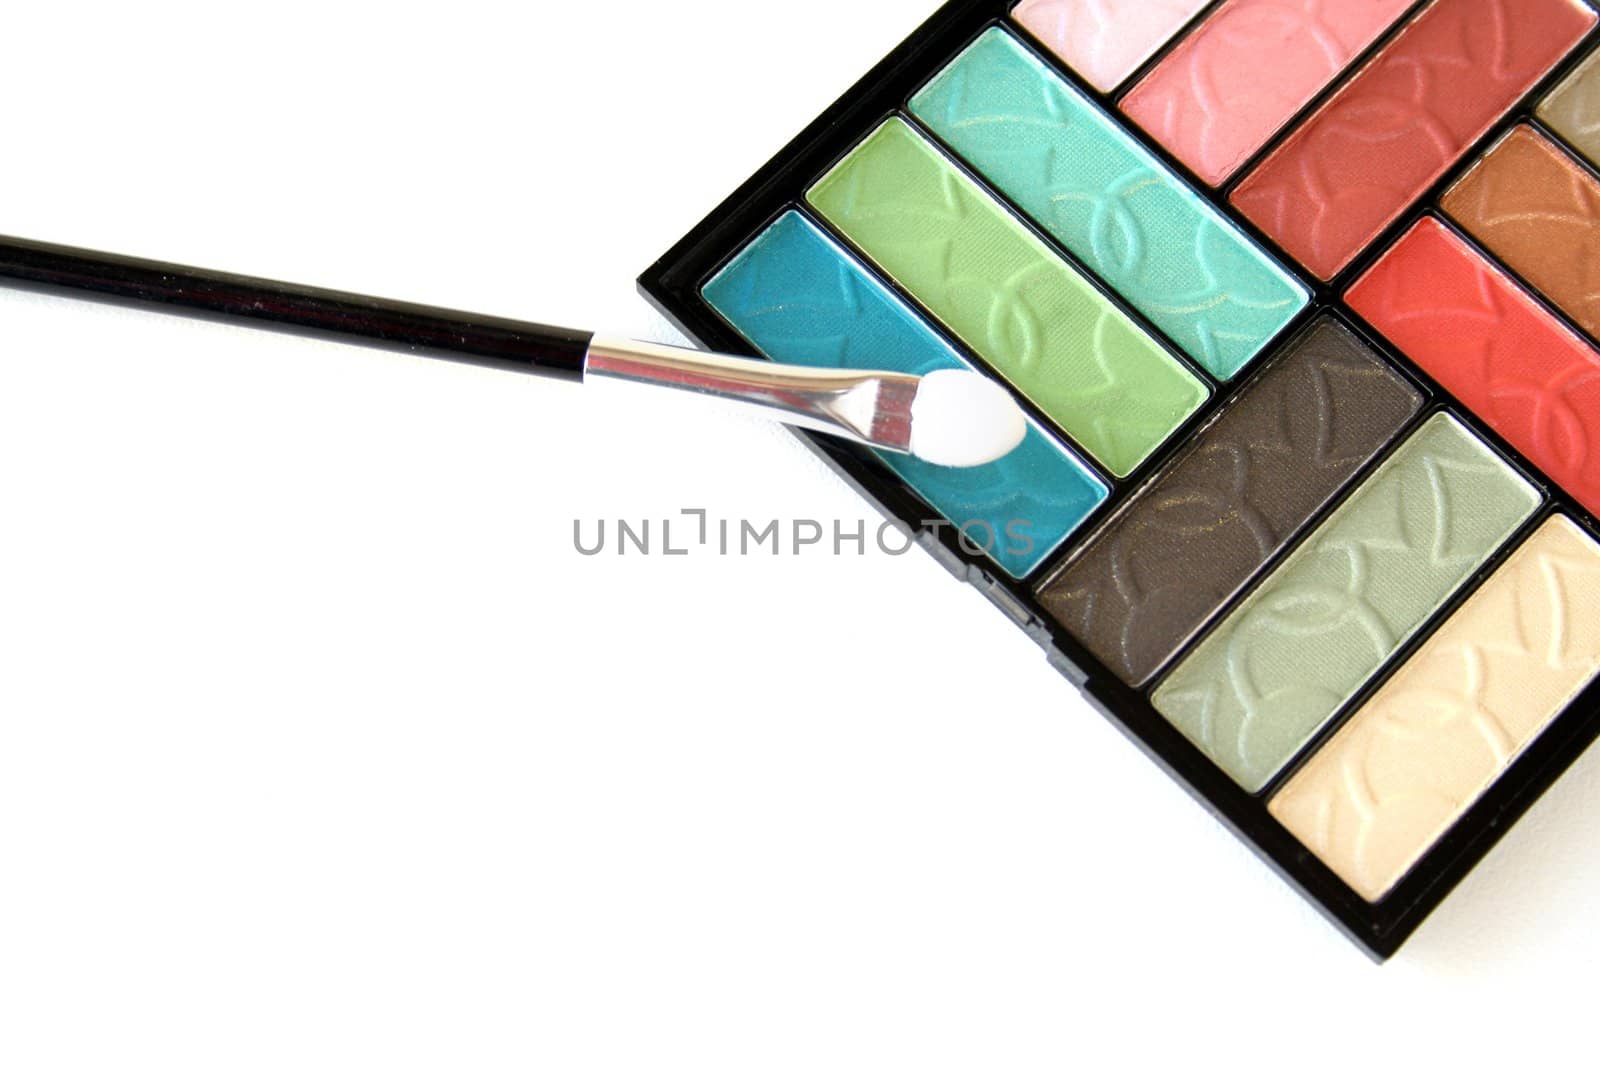 colorful eye shadows and brush isolated on a white background.


